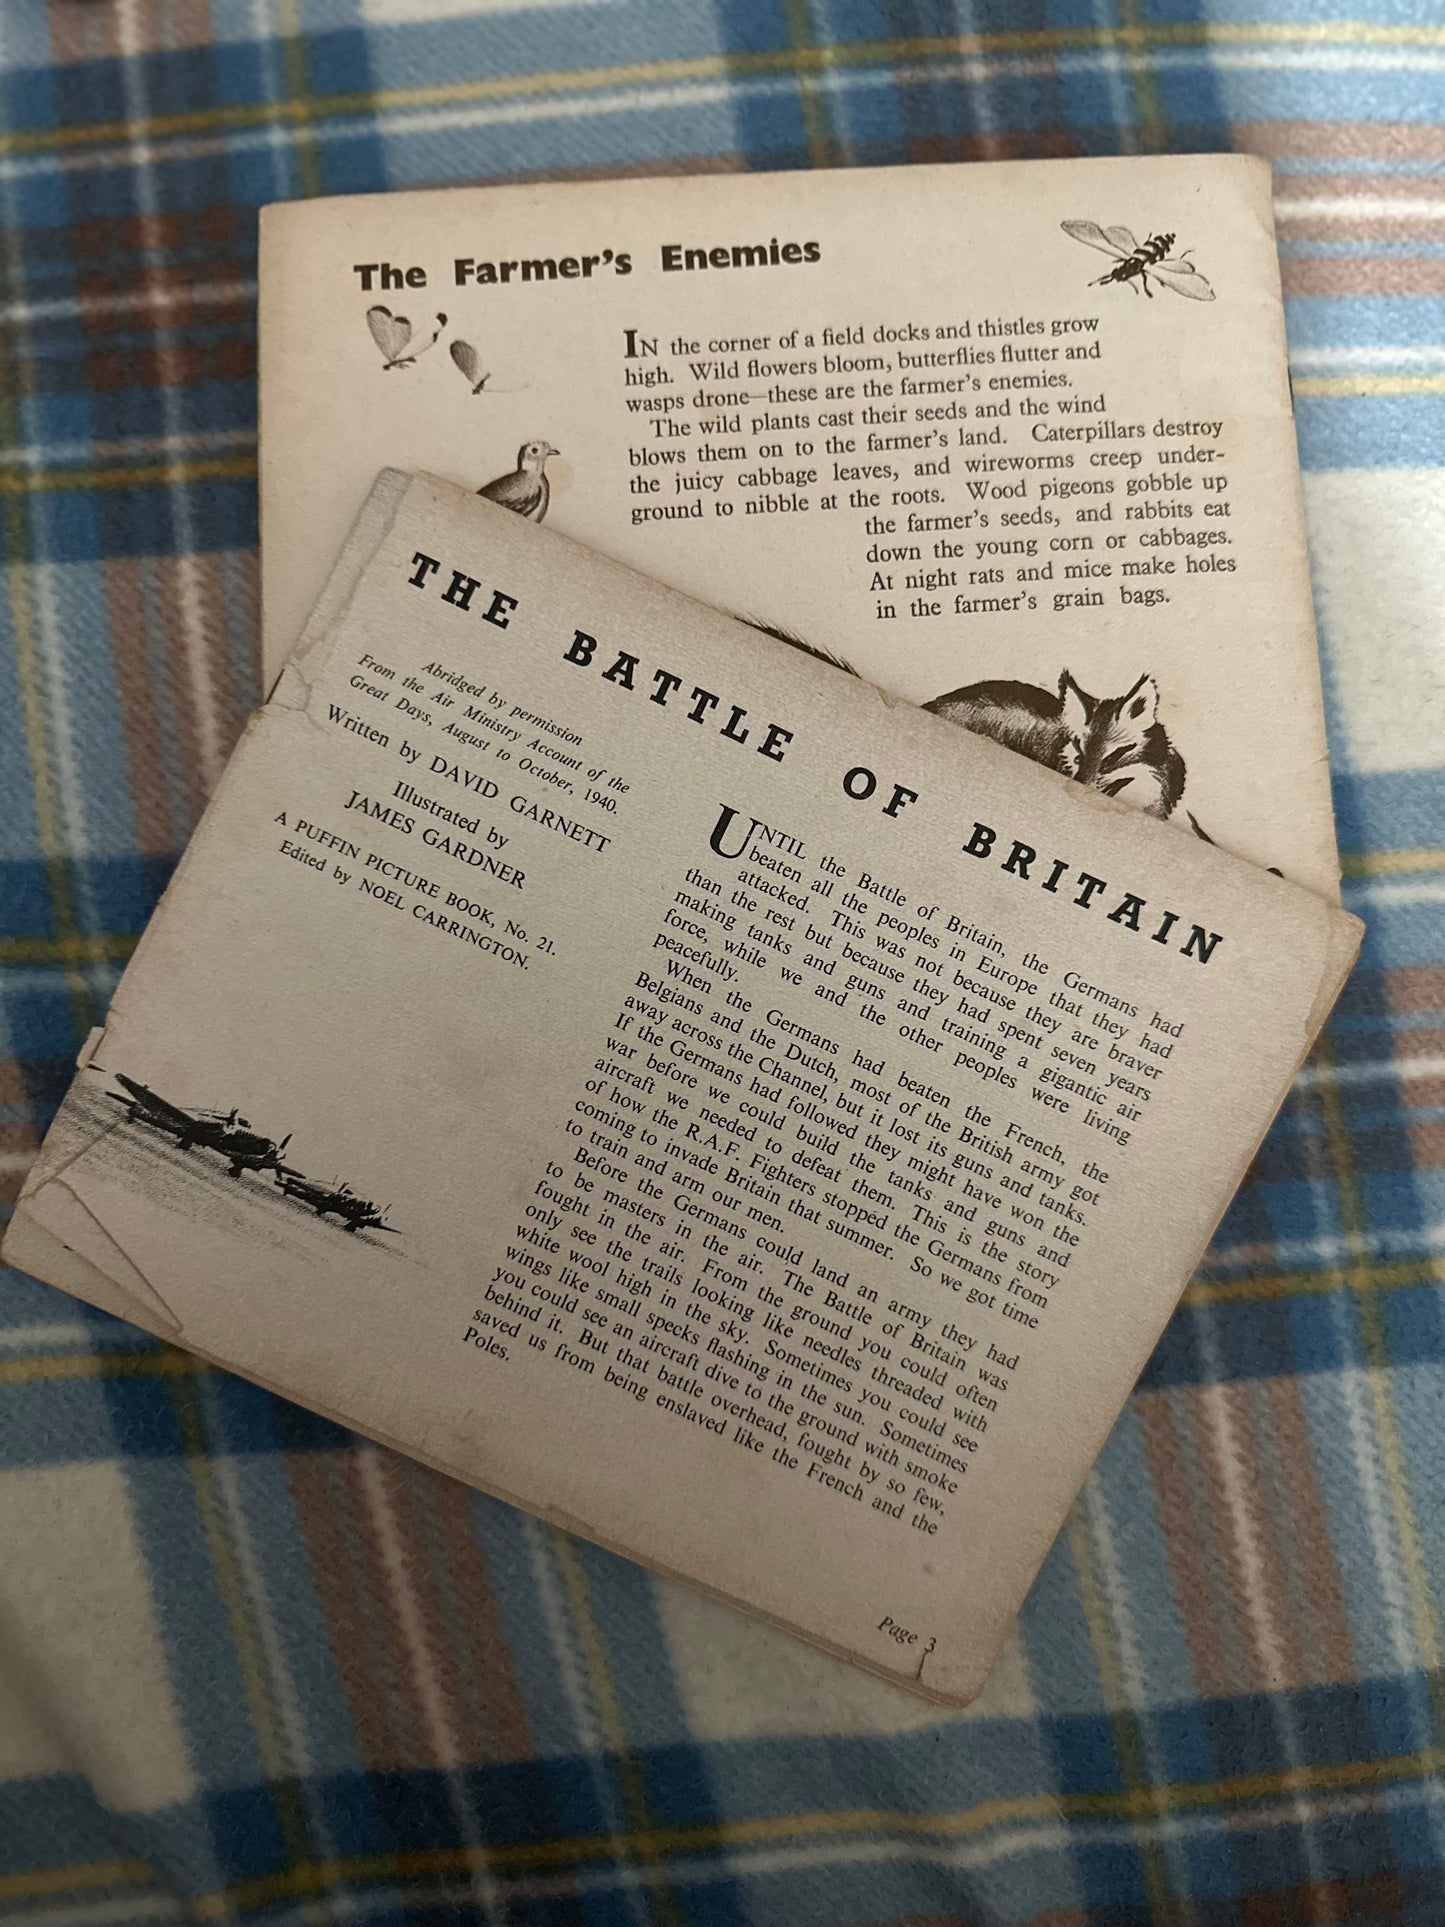 2 x Puffin Picture Books for Spares (Battle Of Britain & On The Farm)